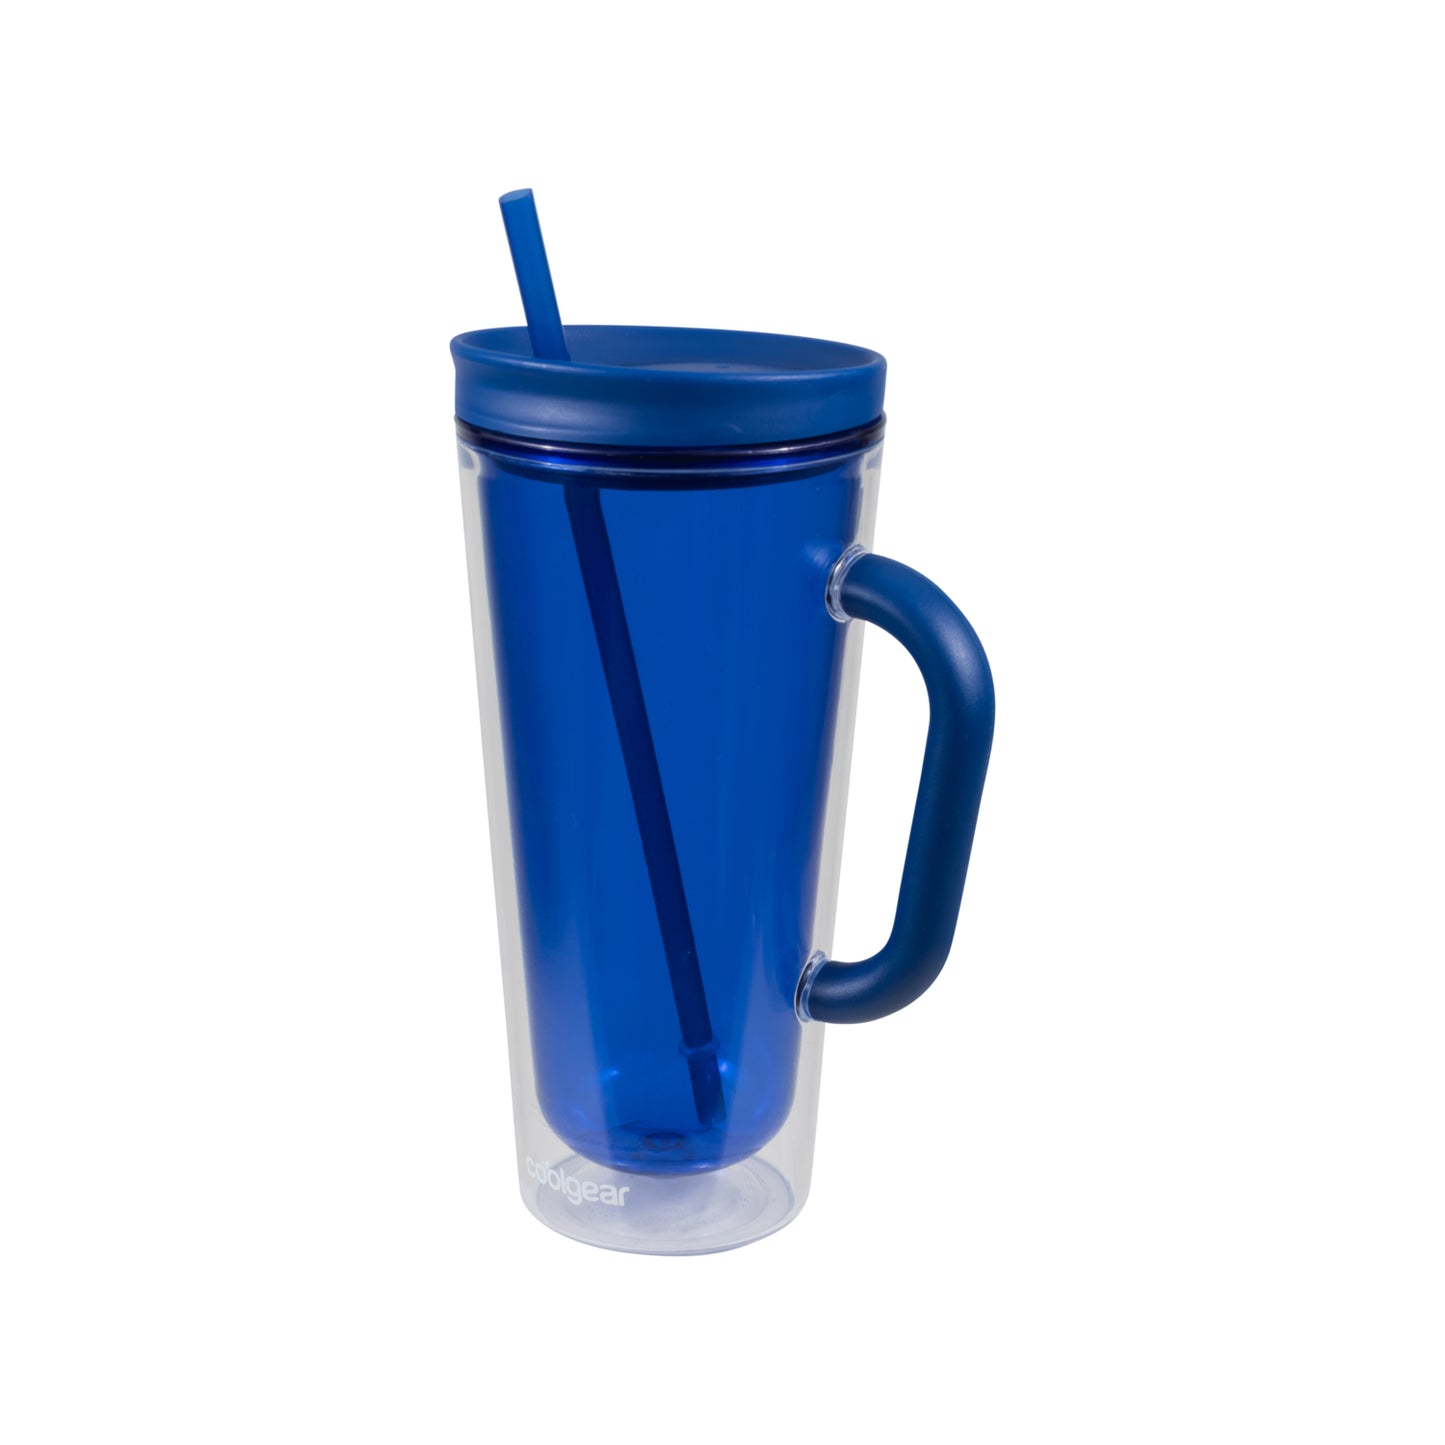 COOL GEAR 3-Pack 26 oz Spritz Tumbler with Straw and Handle | Pressure Fit Lid, Colored Re-Usable Tumbler Water Bottle with Straw and Handle - Blueberry Pack